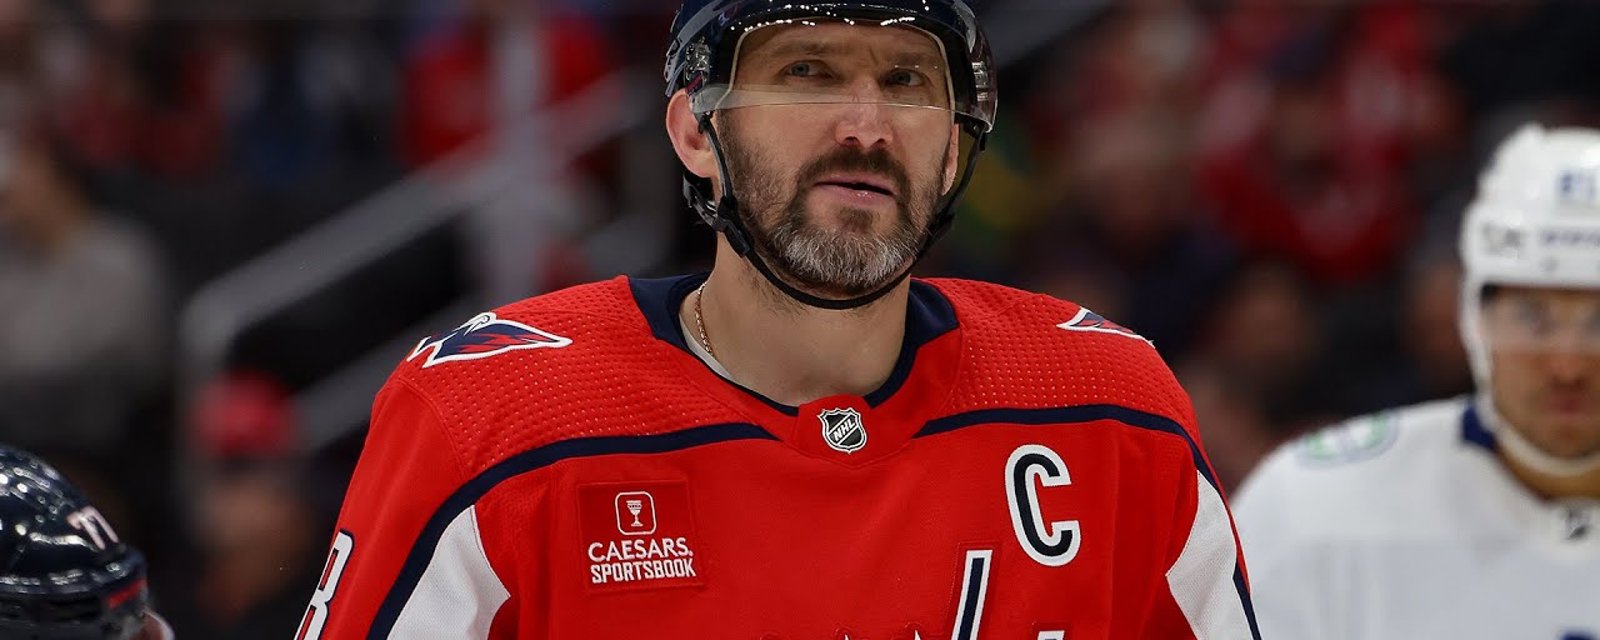 NHL Insider to Alex Ovechkin: Lose weight 